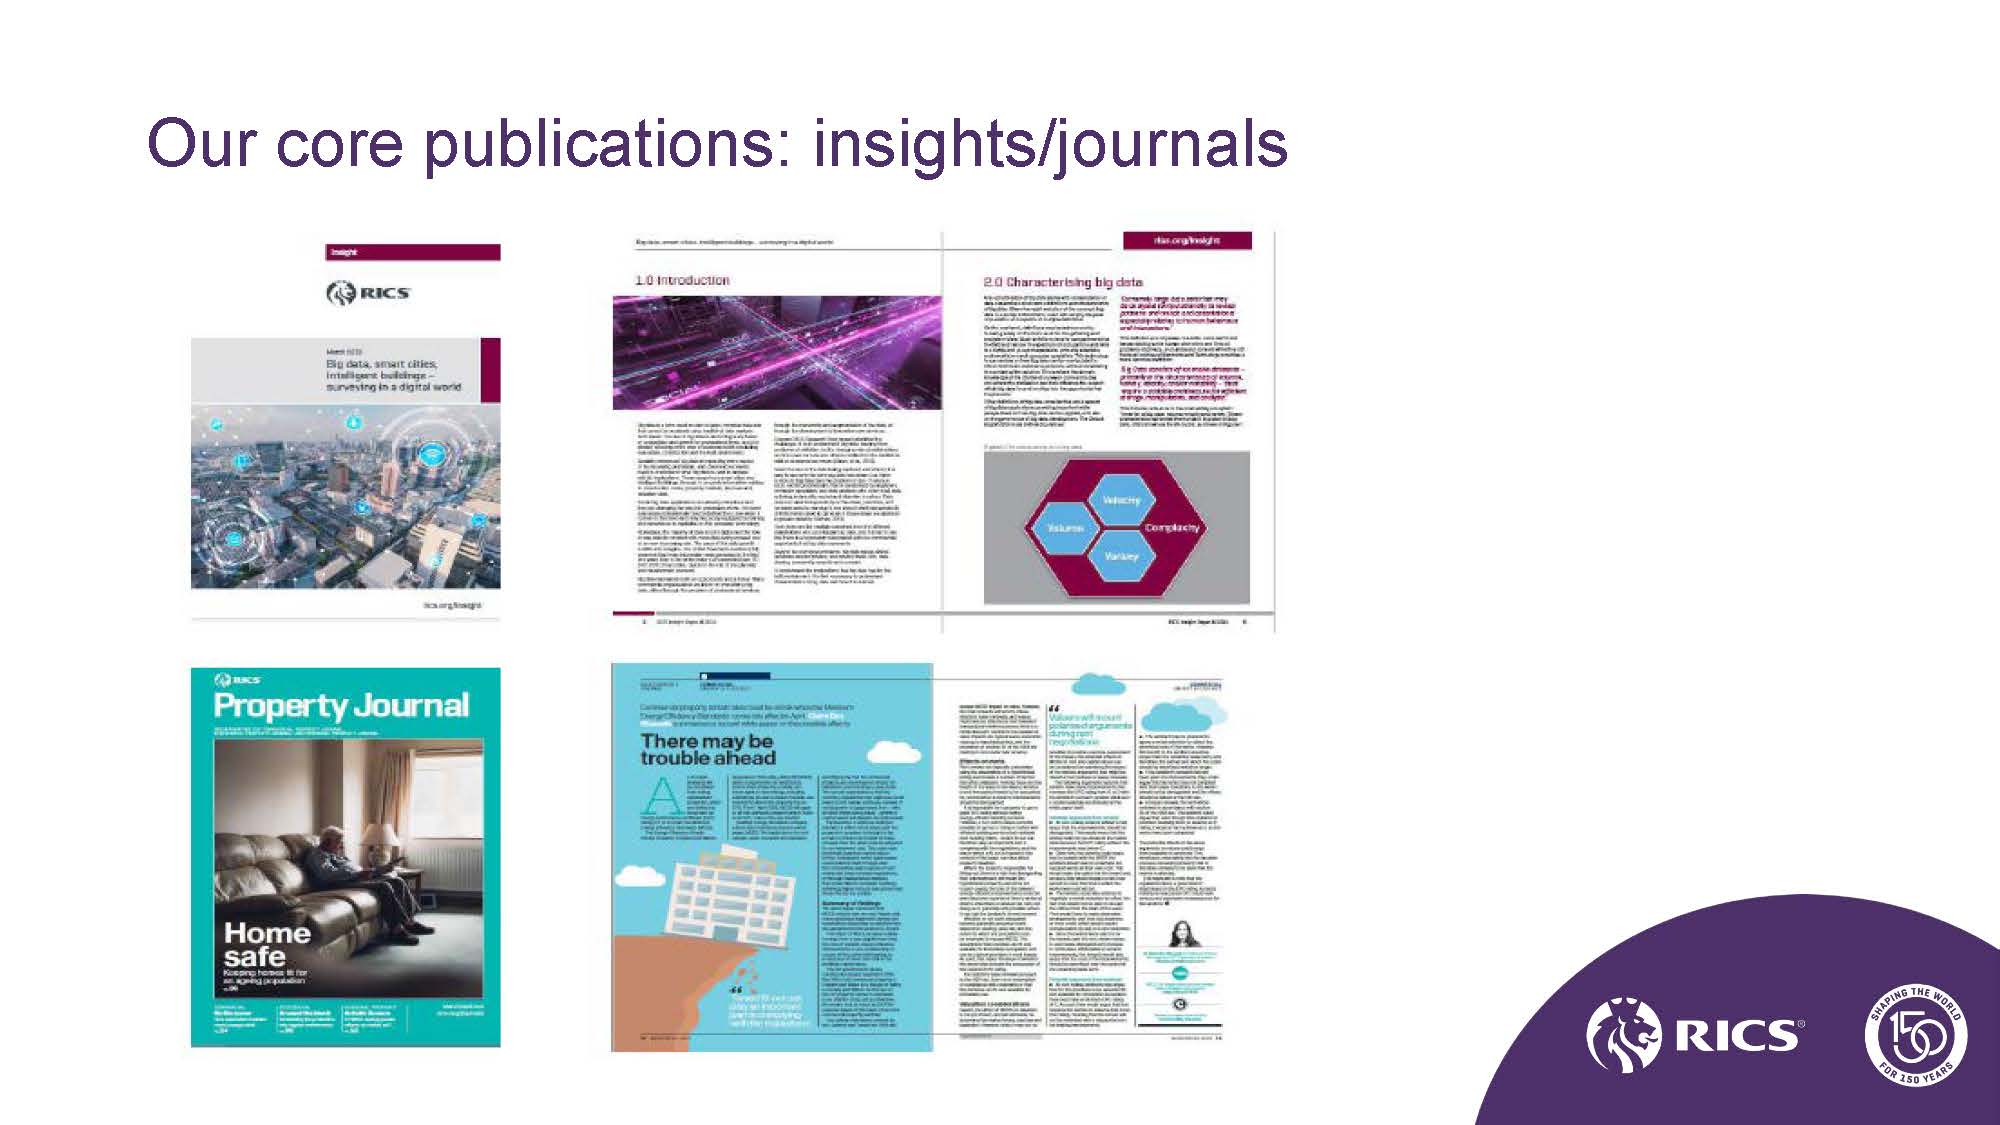 Slide with screenshots of a cover and internal spread from a RICS Insights white paper with images, titles, text, and a diagram, as well as a cover and internal spread from the RICS Property Journal, which has a magazine-style layout.